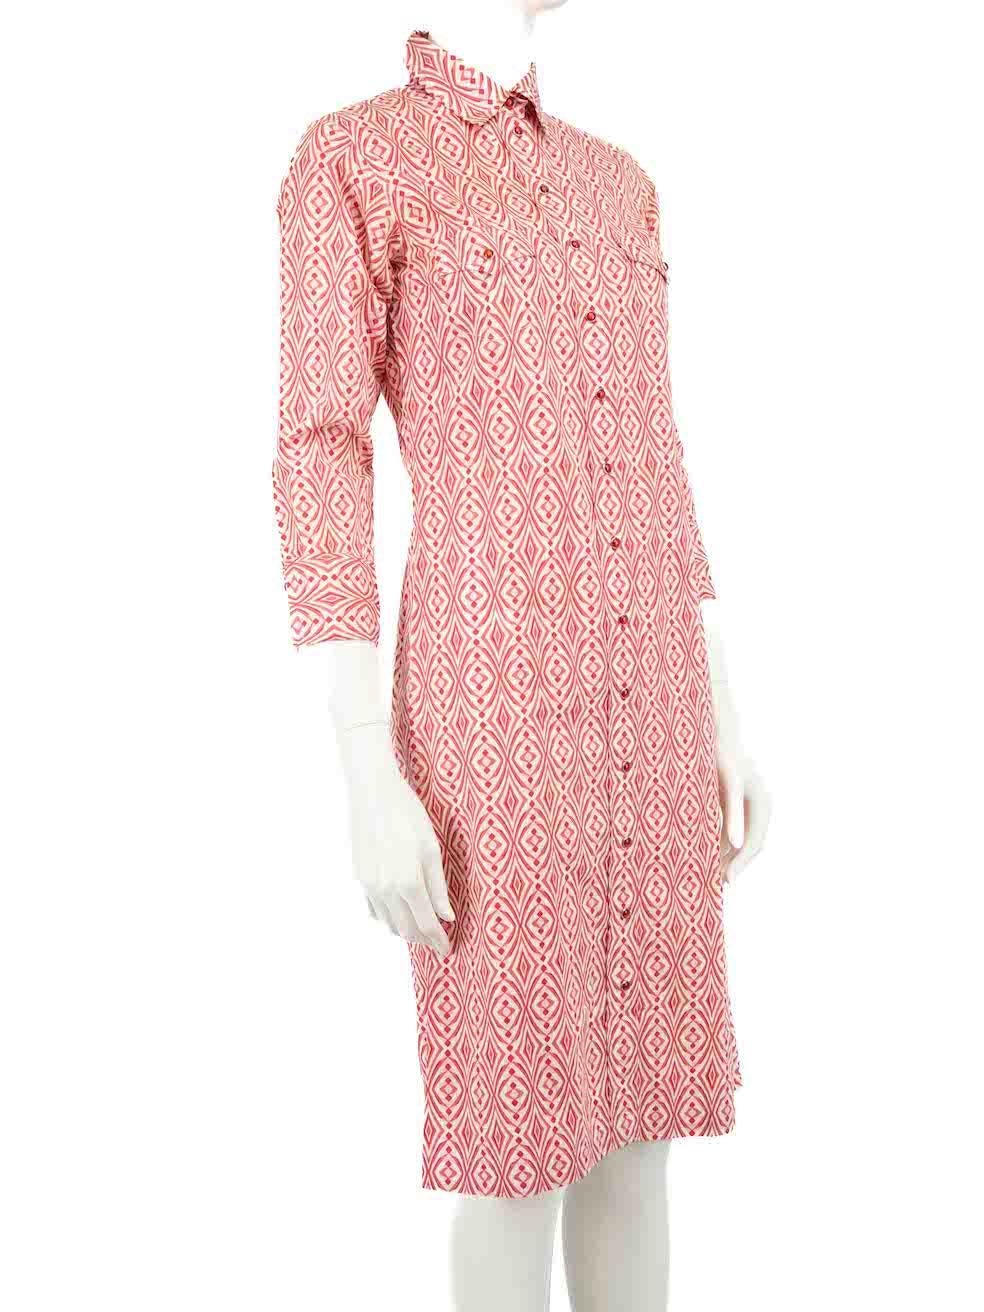 CONDITION is Good. Minor wear to dress is evident. Light wear to the fabric surface which is lightly discoloured at the front on this used Chloé designer resale item.
 
 
 
 Details
 
 
 Pink
 
 Cotton
 
 Shirt dress
 
 Abstract pattern
 
 Long